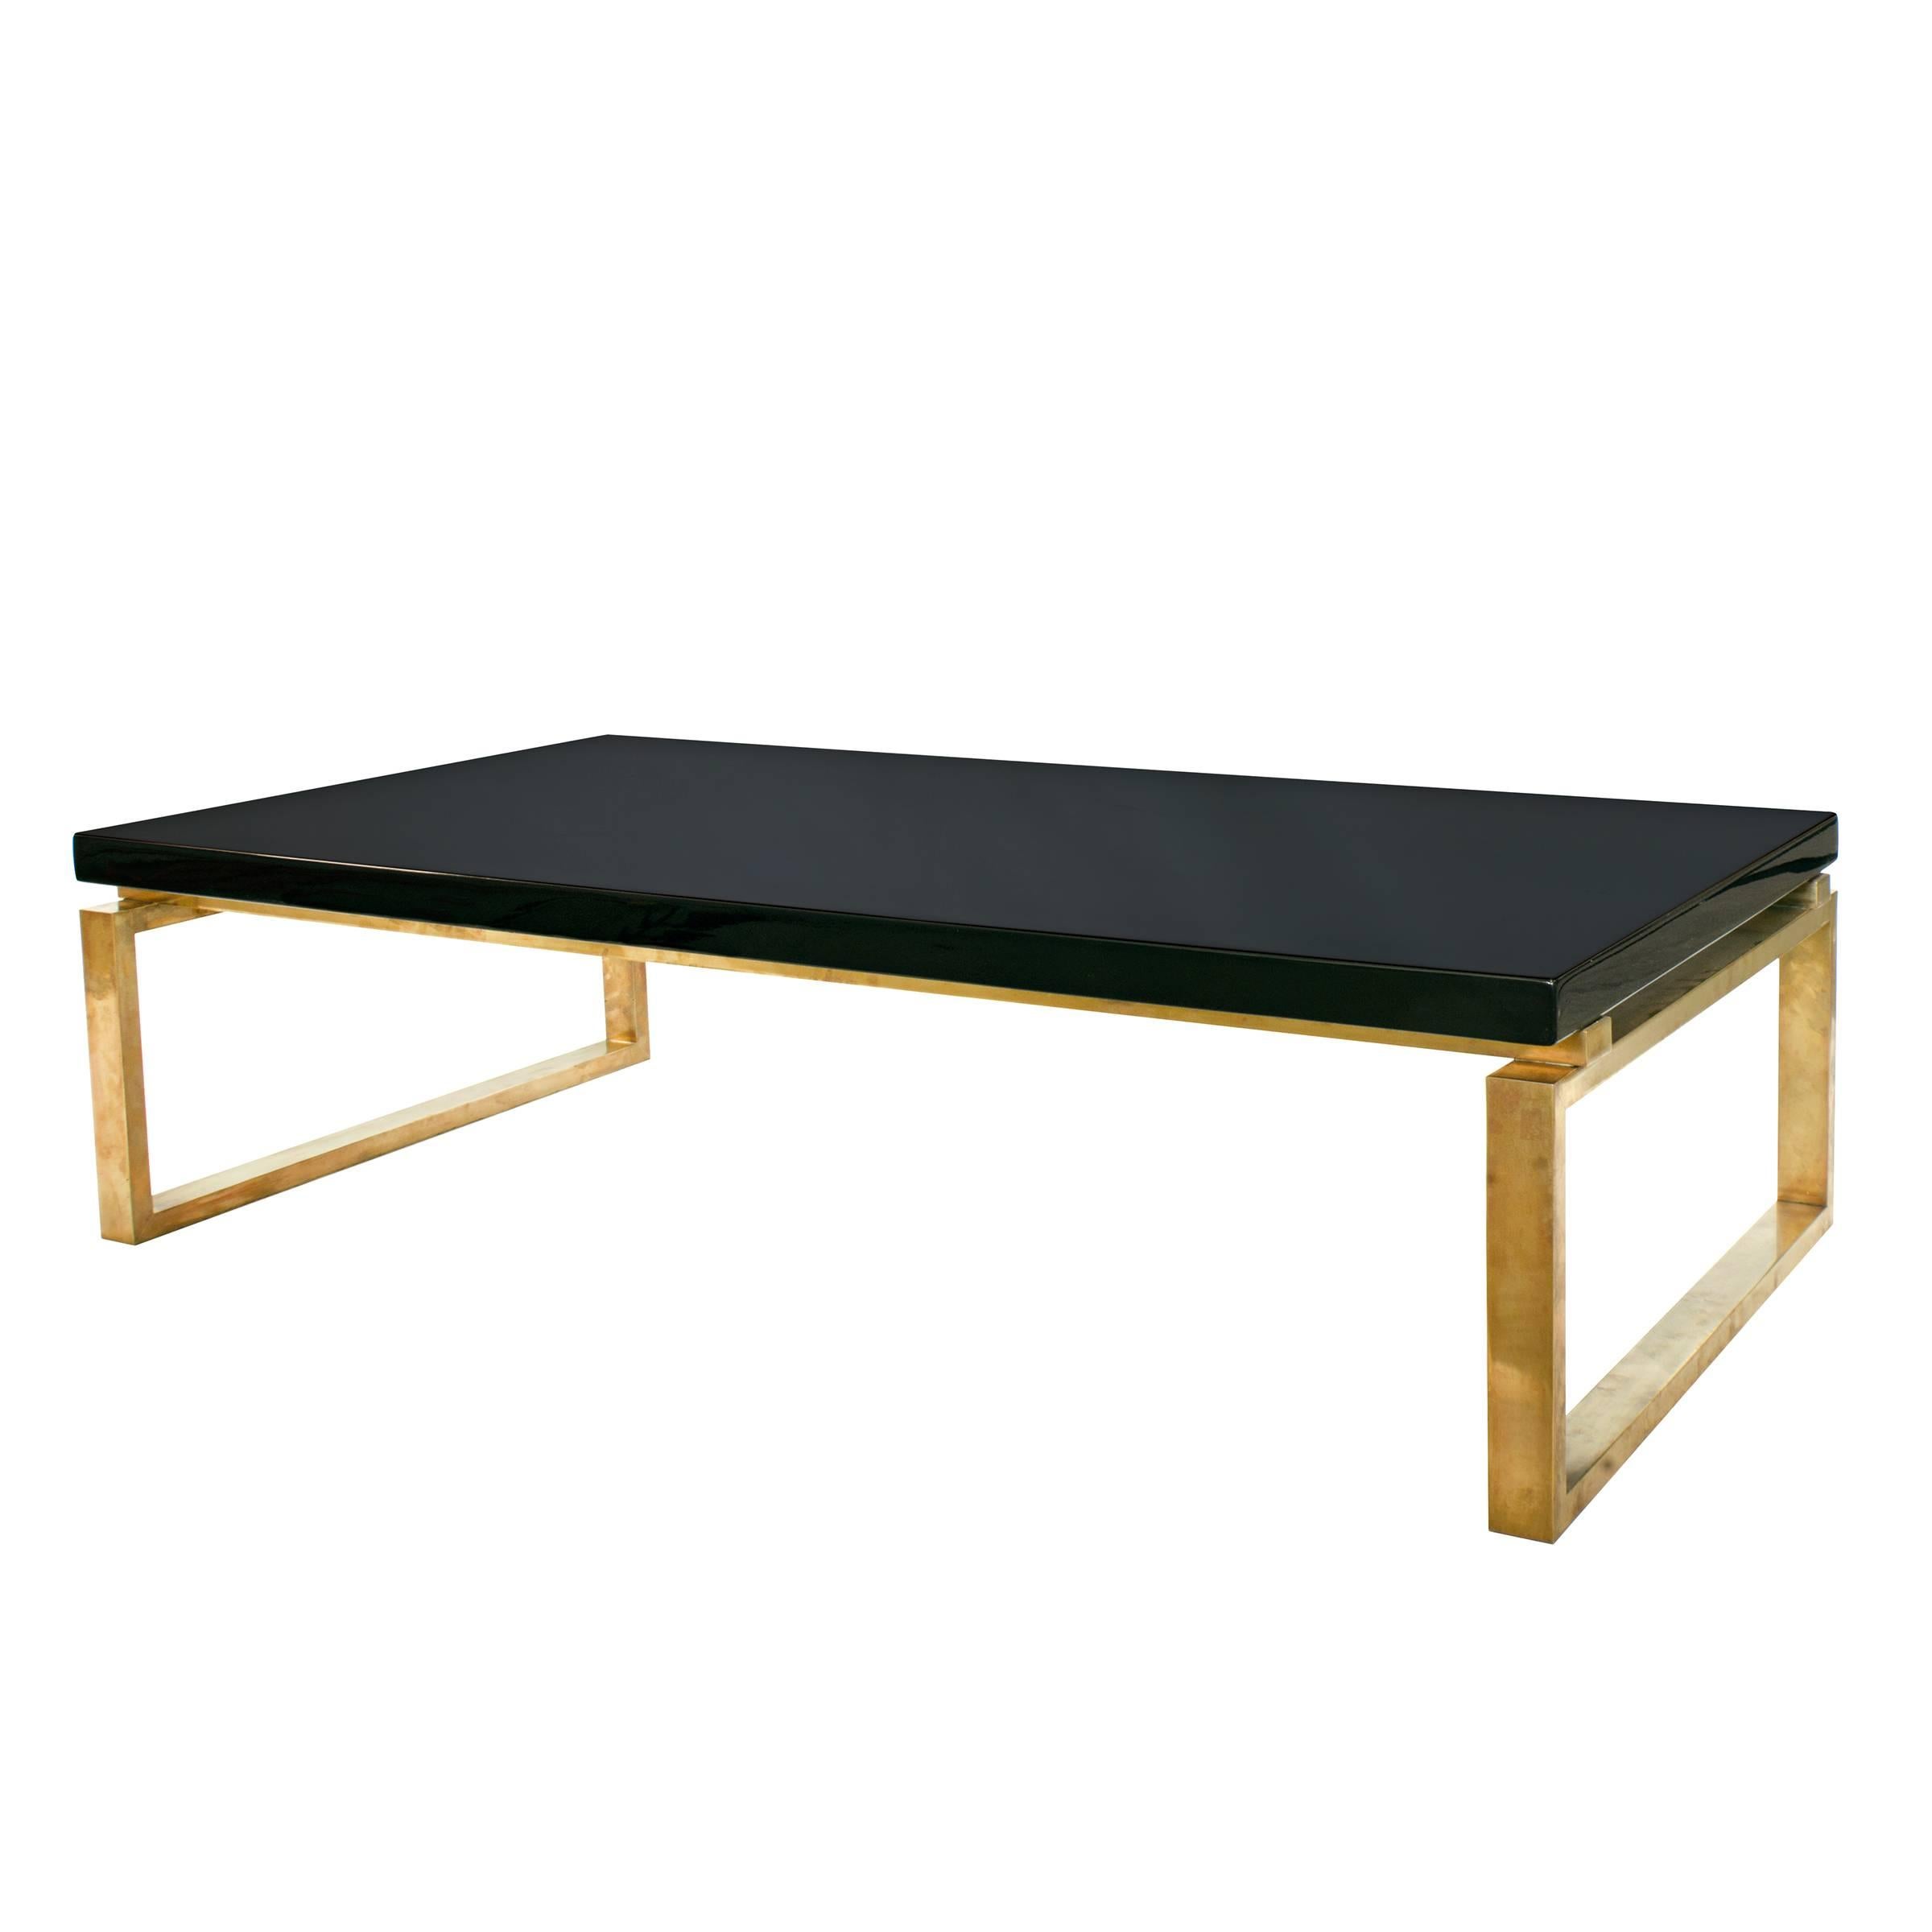 A very unusual low black lacquered coffee table with a square brass base. by Guy Lefevre